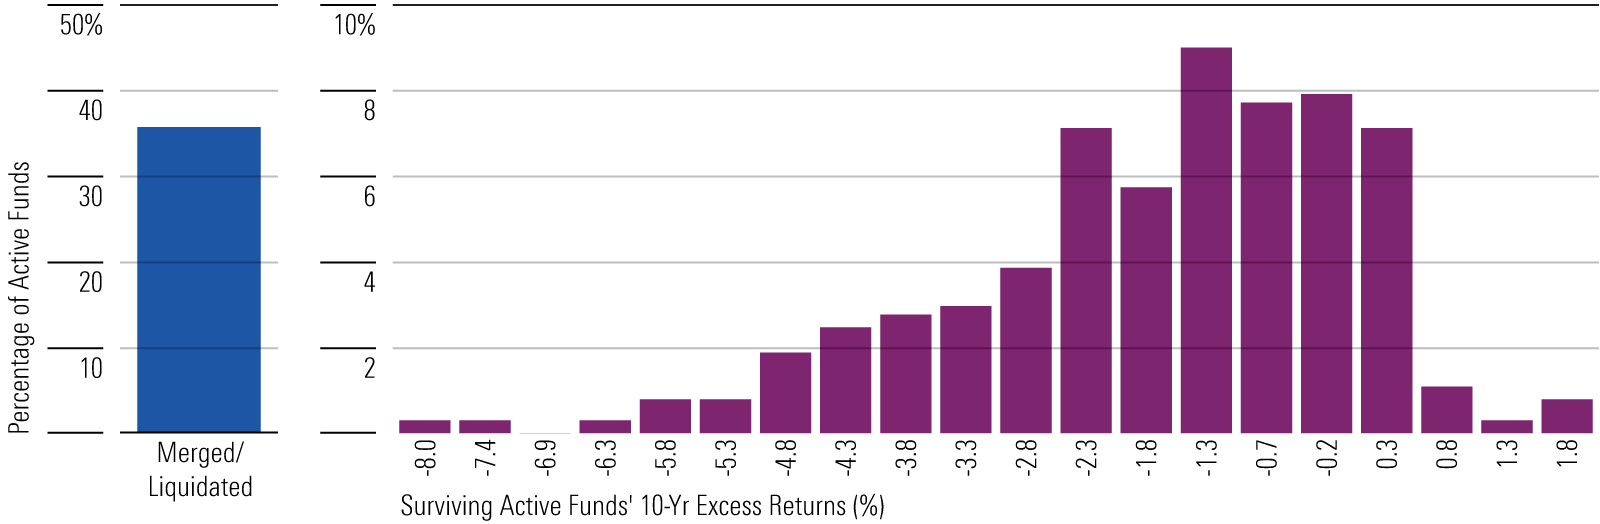 Bar graph of distribution of excess returns.